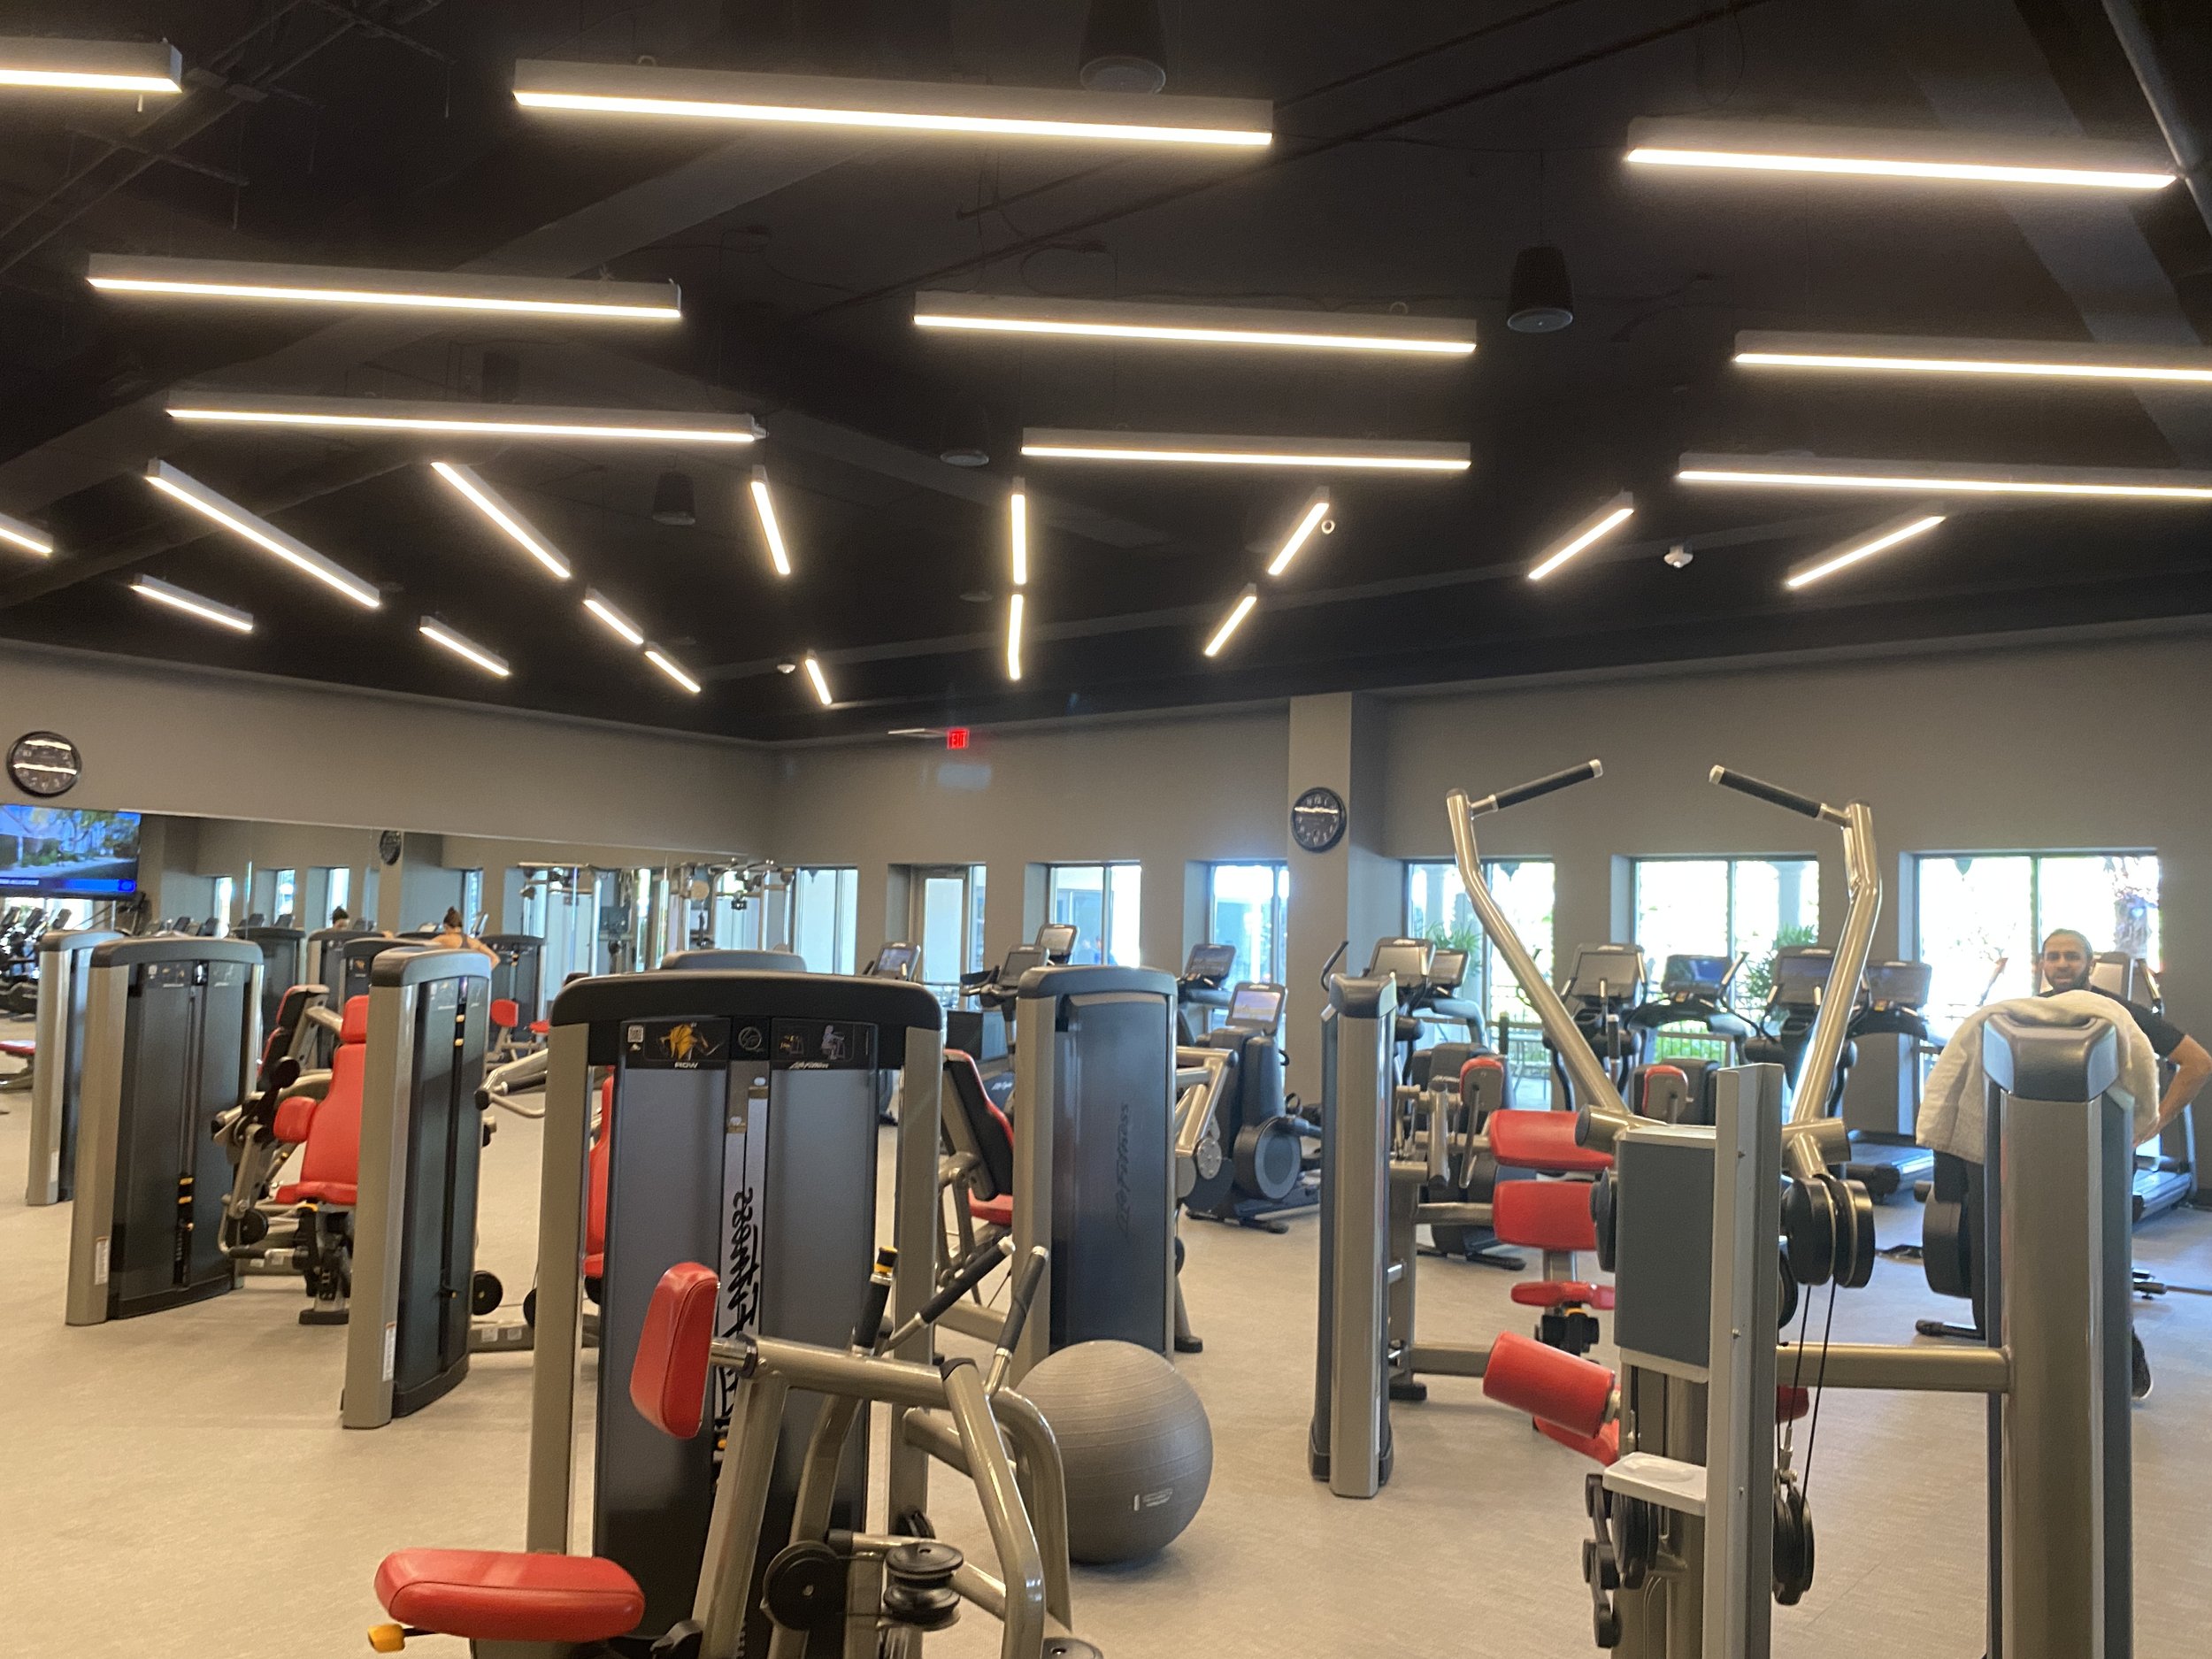  This complimentary fitness center offers all equipment needs for a cardio-vascular workout routine.     Additional amenities include separate locker rooms for men and women with full amenities, towels, and a quiet lounge area.&nbsp; Each locker room